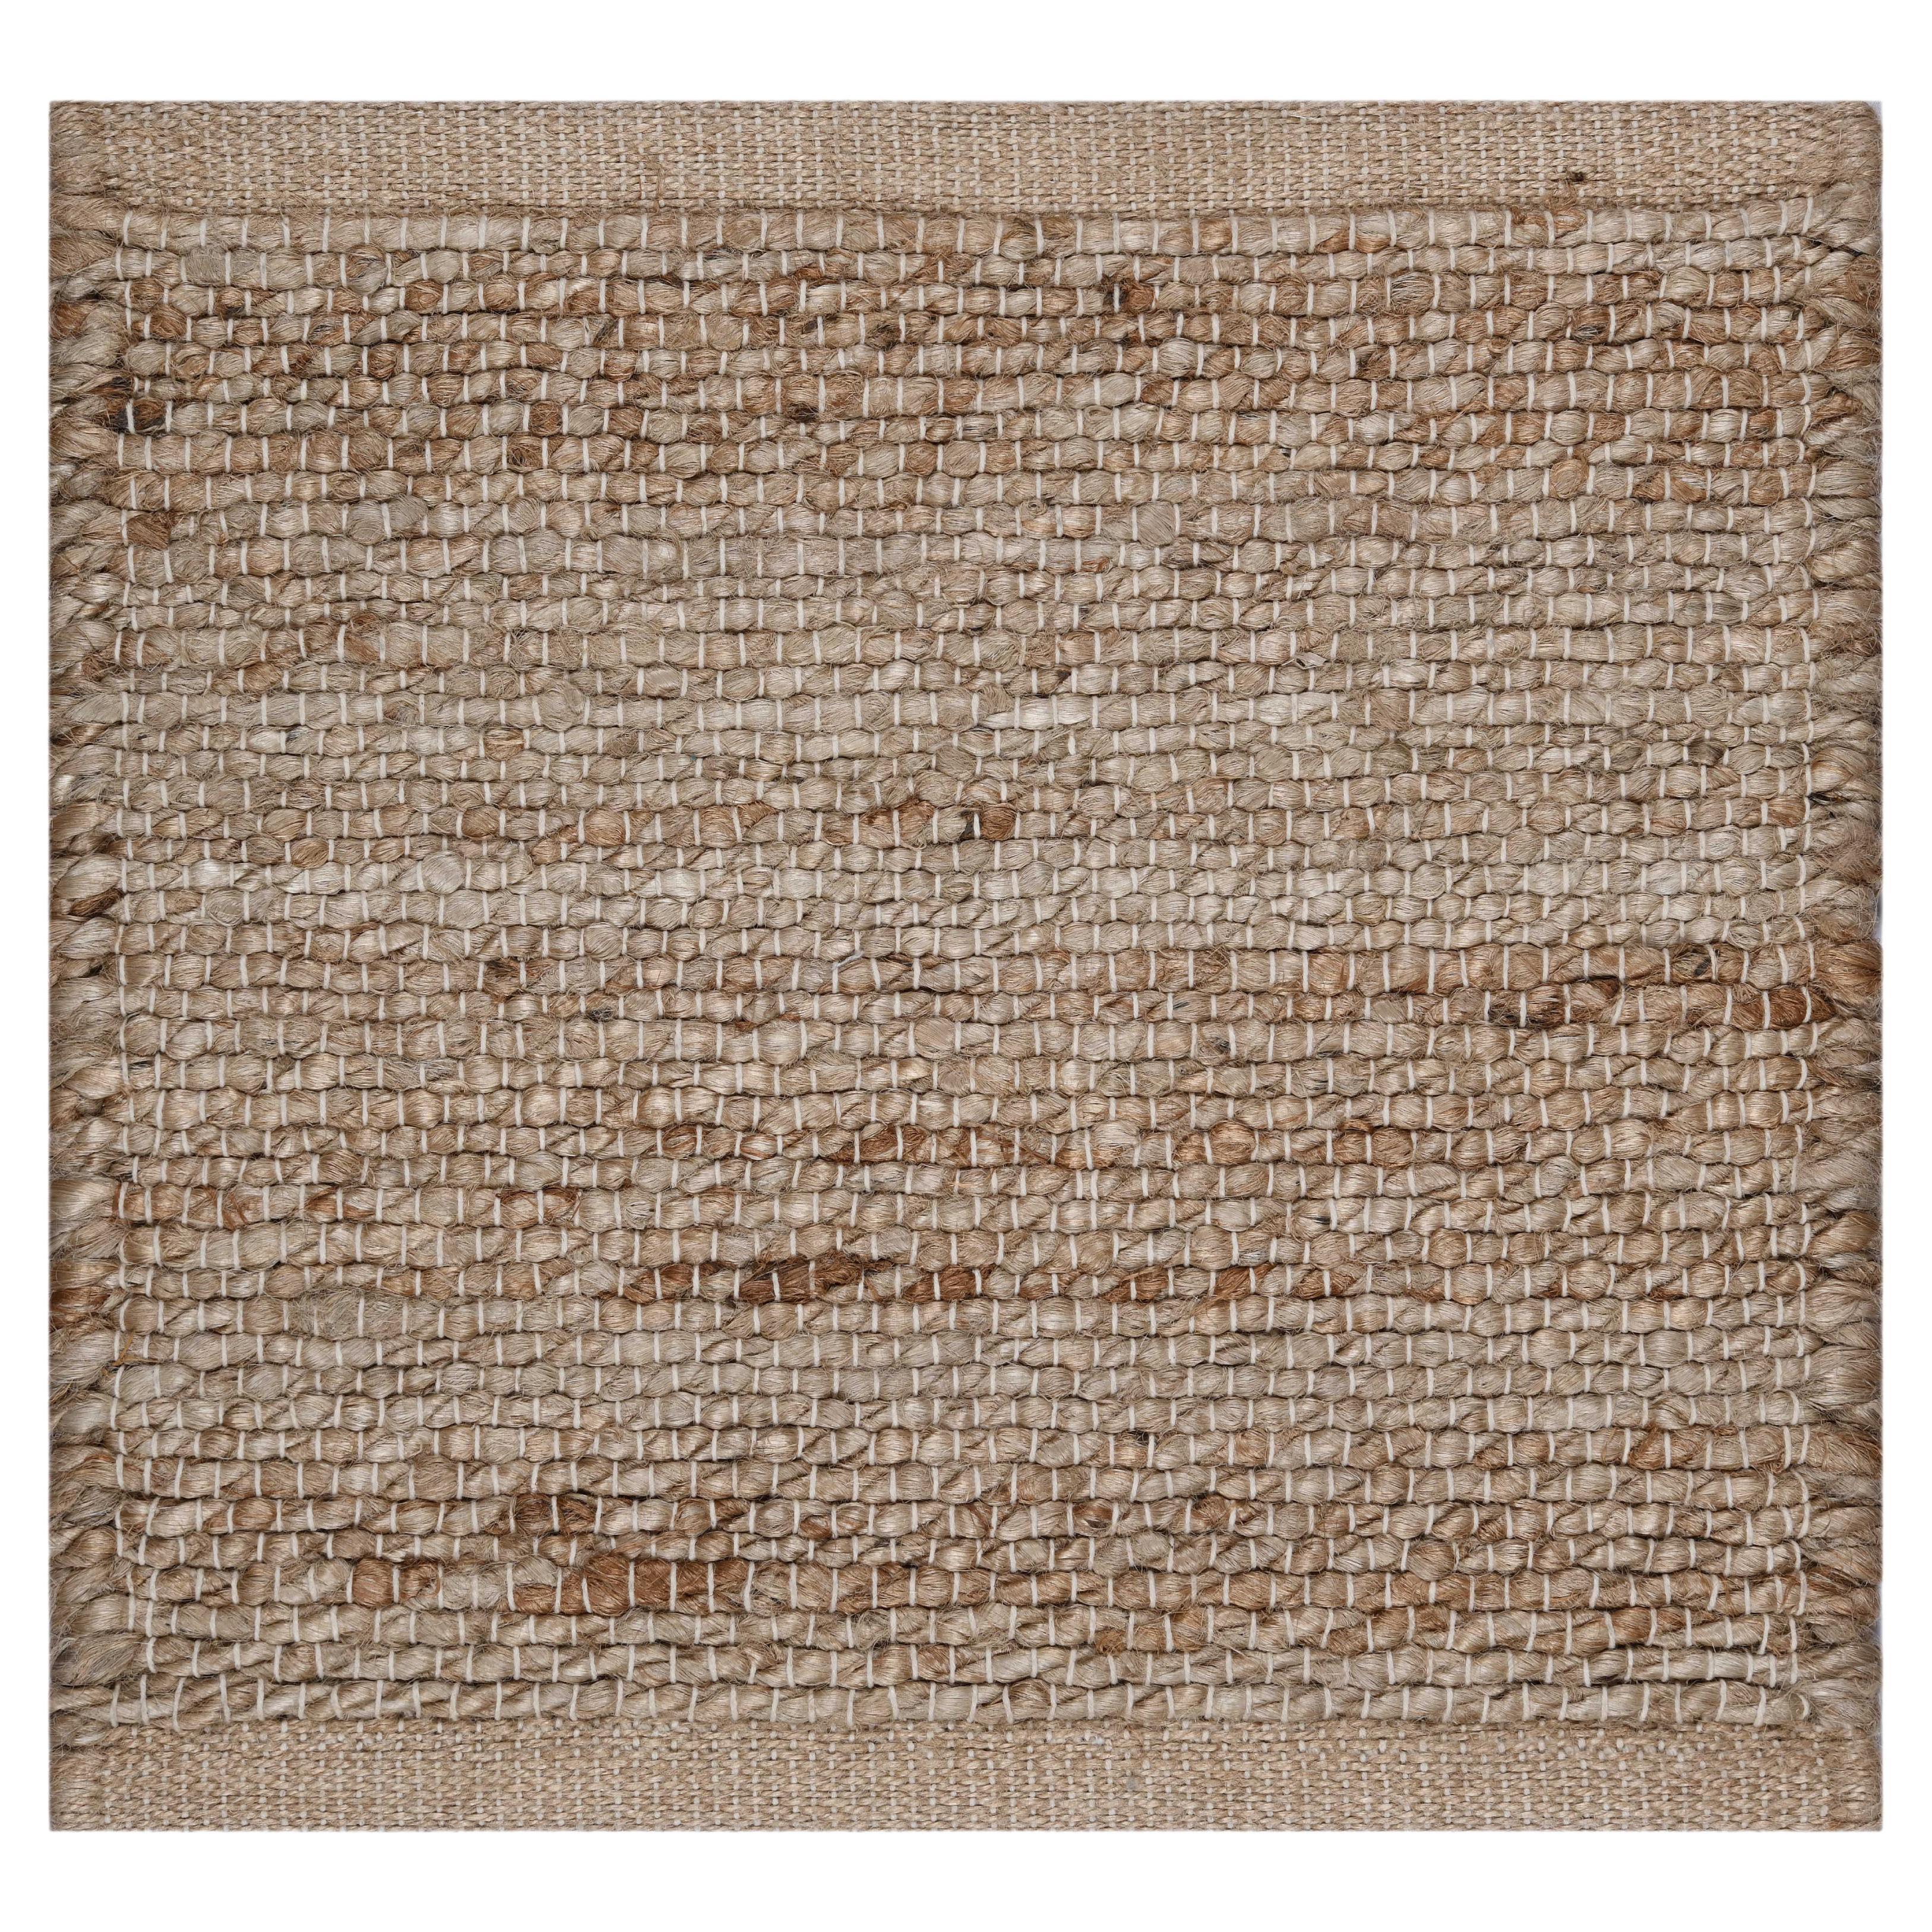 Community, synonymous with growth, togetherness and belonging, has inspired the making of Dern – portrayed here with linear lines, accented and bound by a single thread. Woven from 100% handspun jute, Dern is beautifully adaptive in its subtlety.